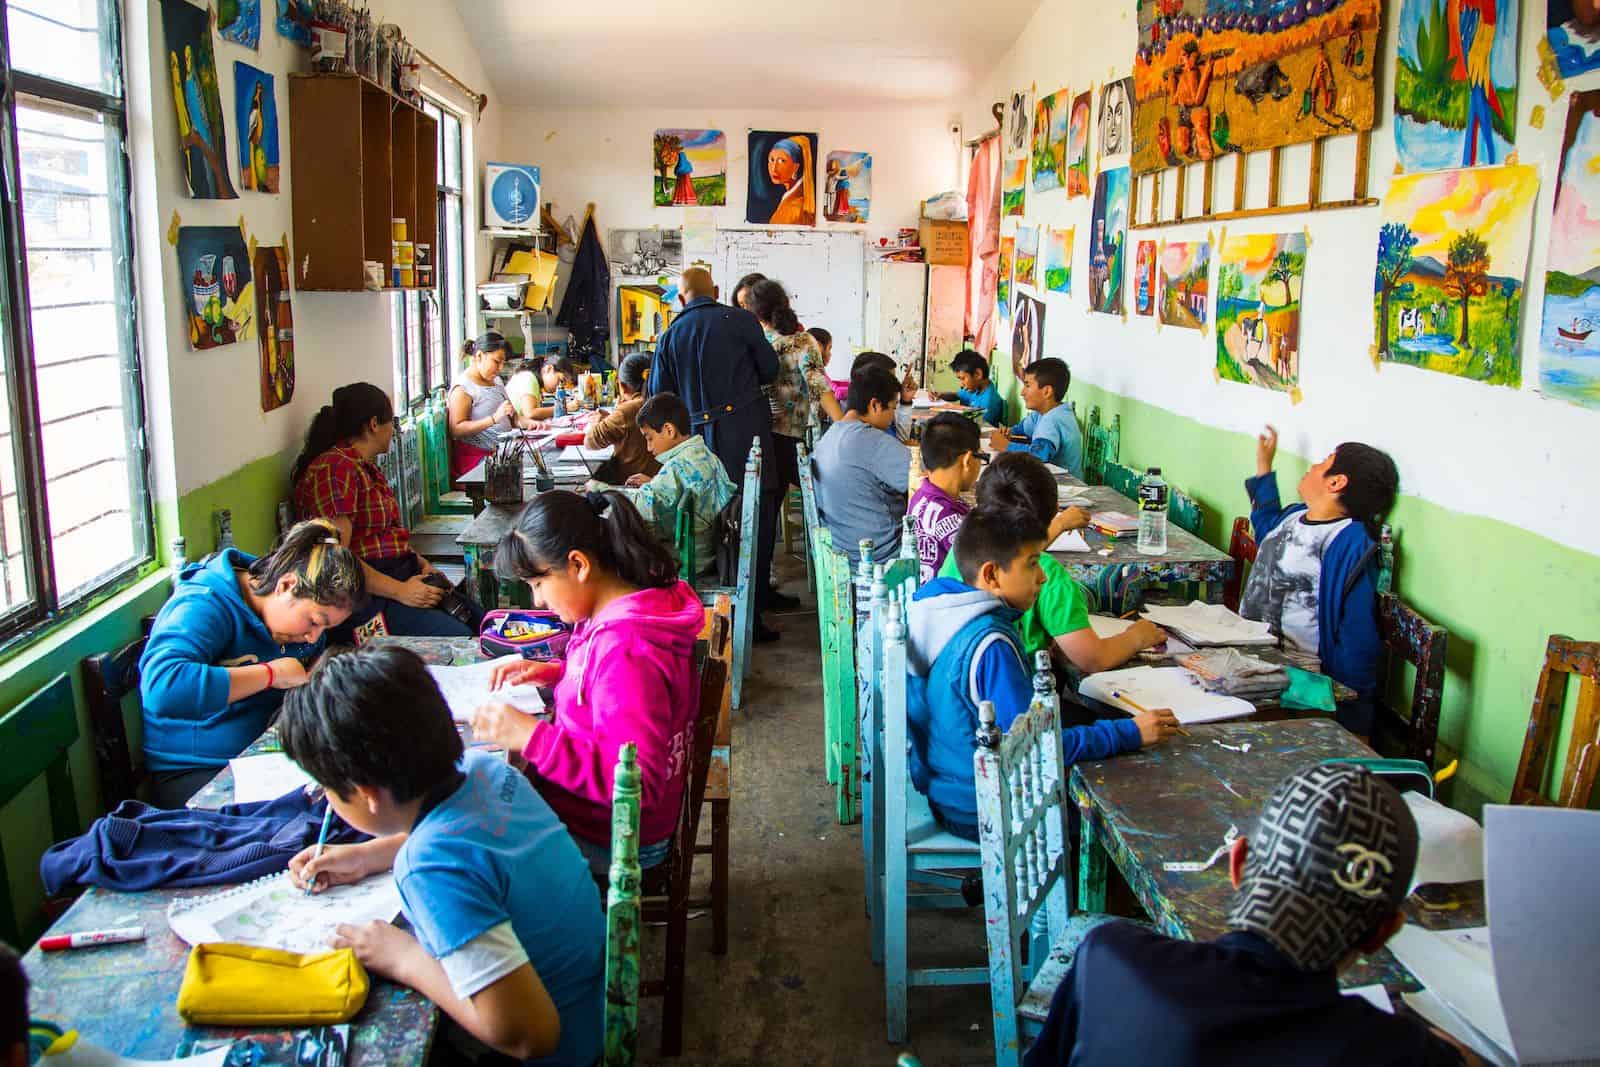 In a classroom full of brightly colored chairs and tables, children paint on white paper. The walls of the classroom are covered in paintings.